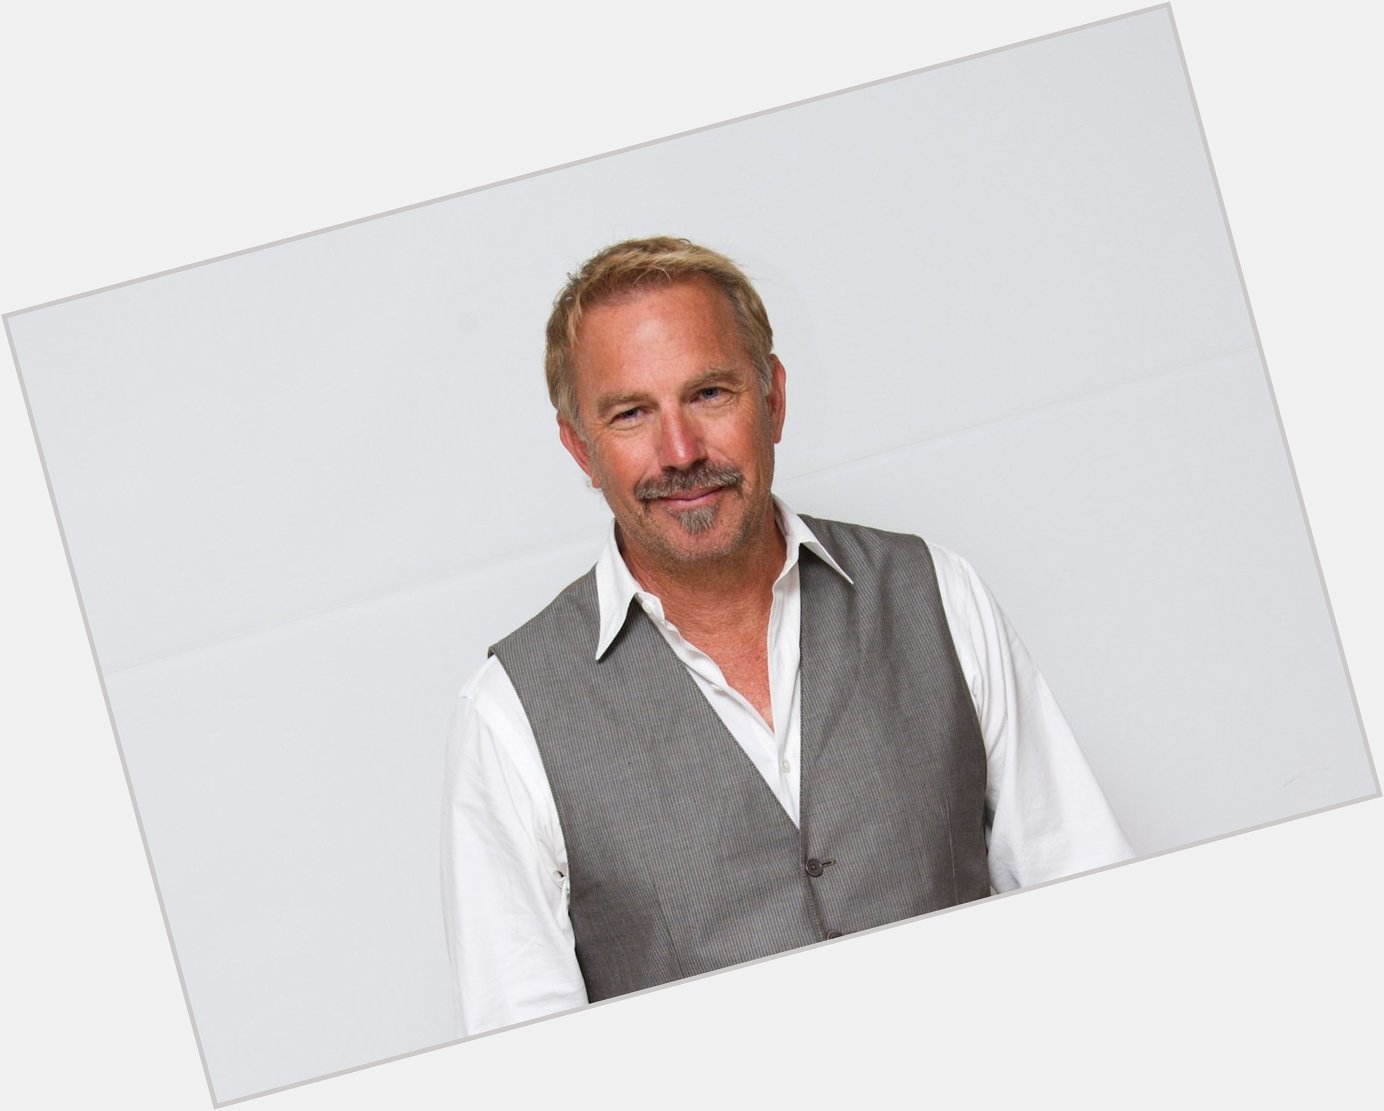 Happy 66th birthday to (my first celebrity crush) Kevin Costner. What is your favorite Costner film? 